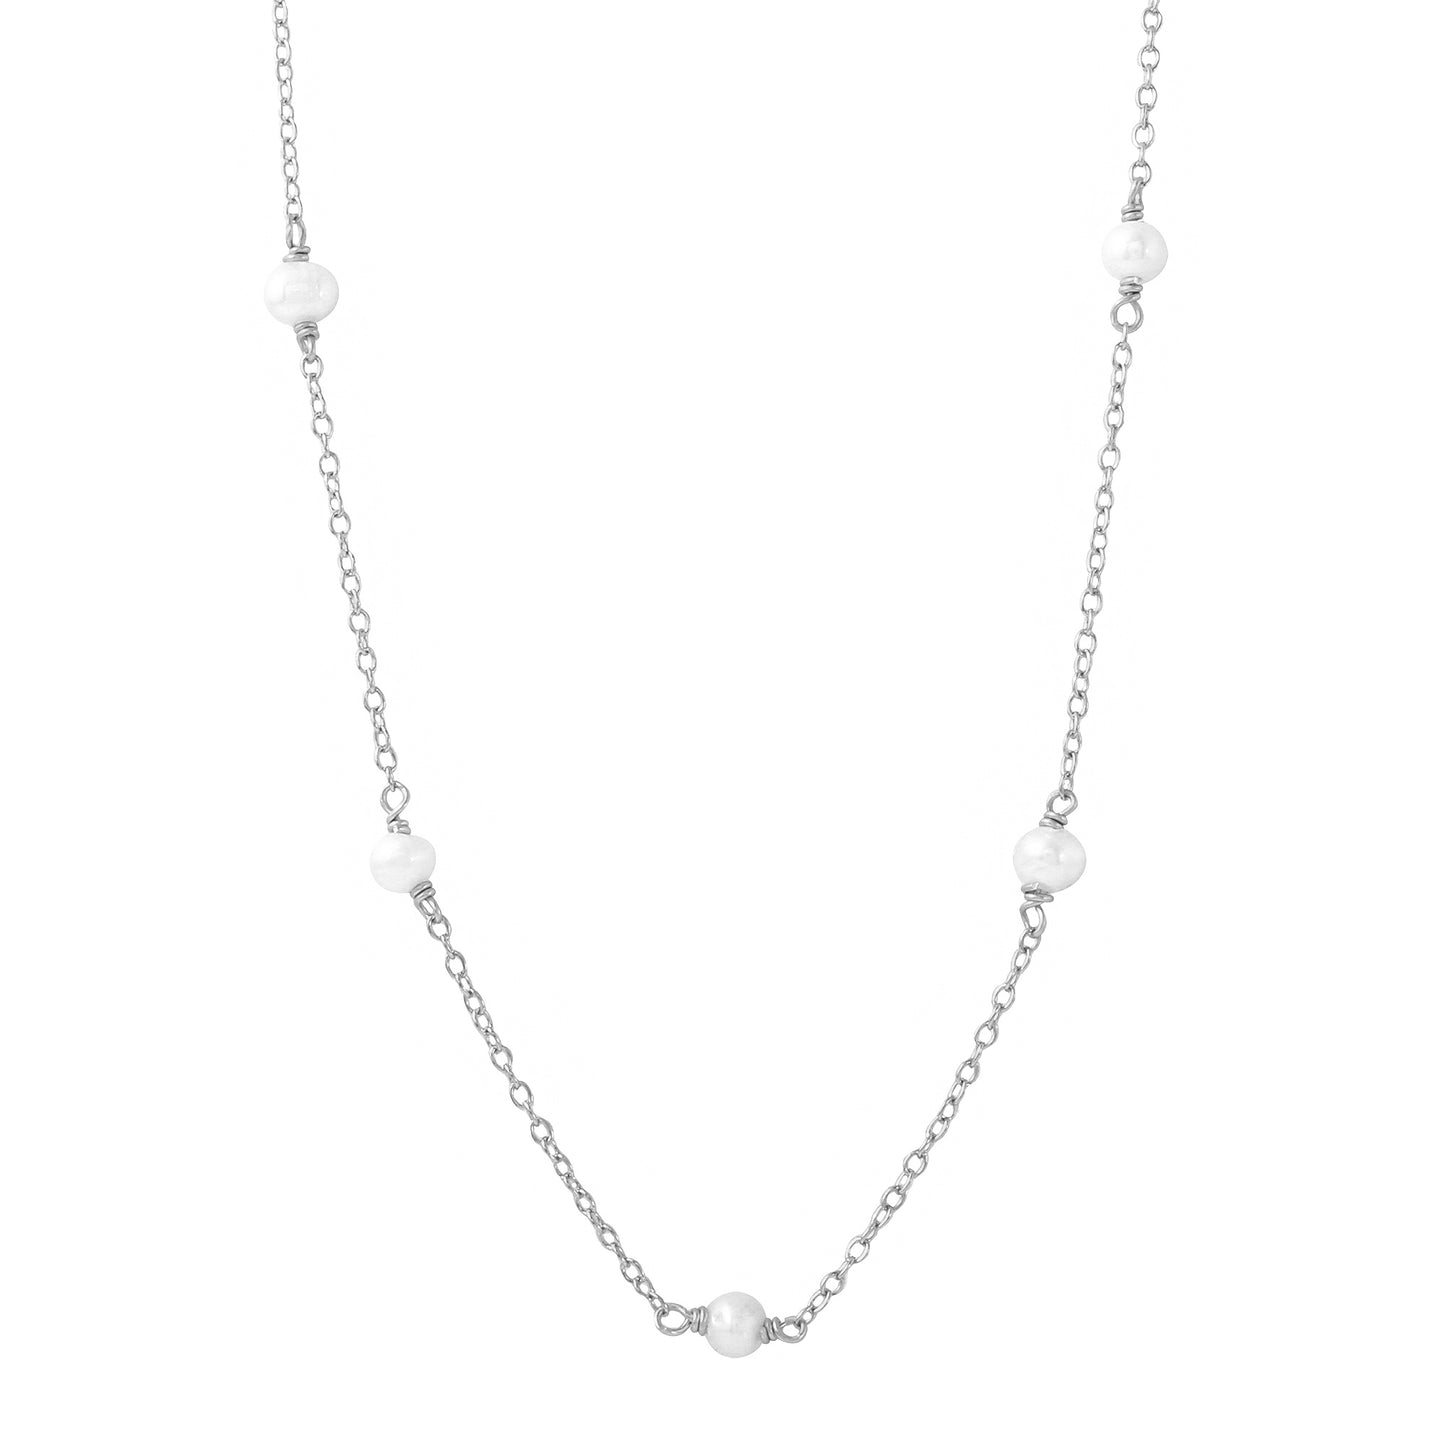 Dainty Pearls Necklace